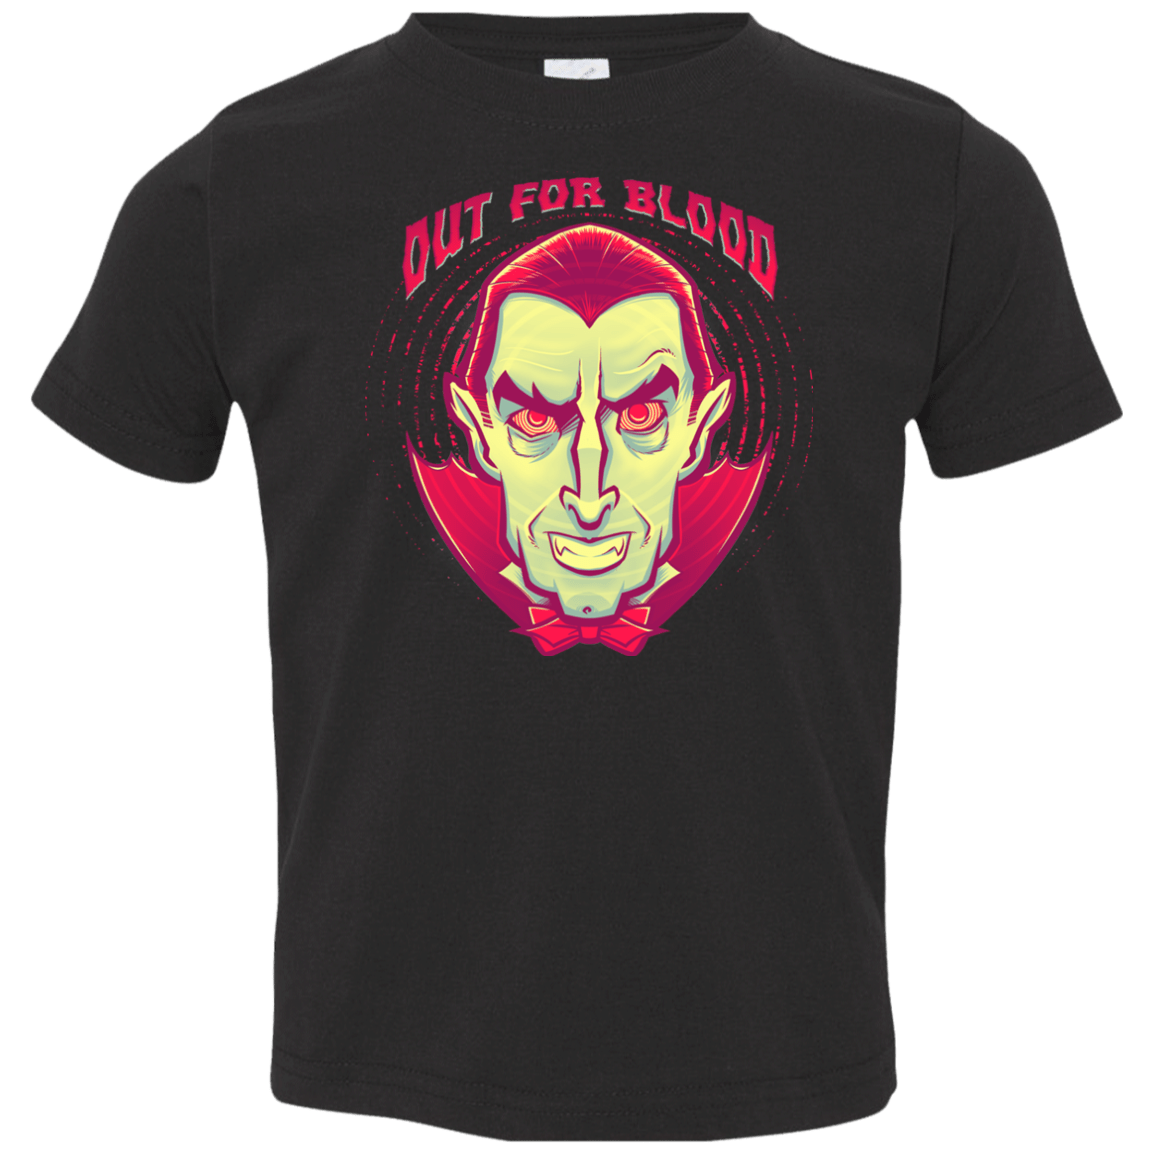 OUT FOR BLOOD Toddler Premium T-Shirt